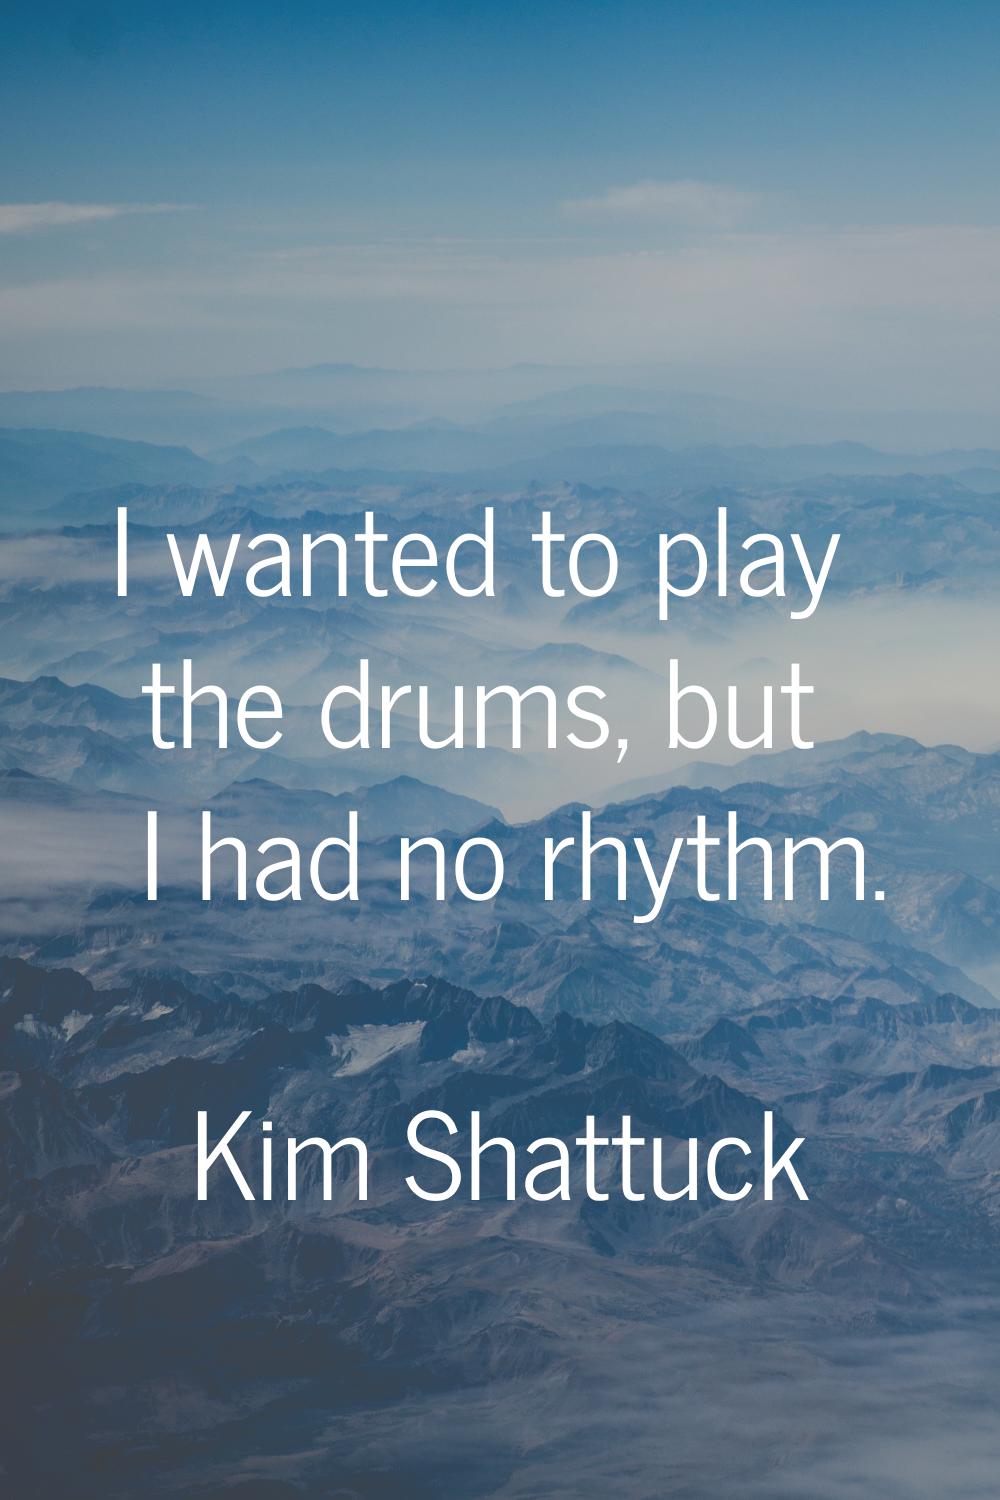 I wanted to play the drums, but I had no rhythm.